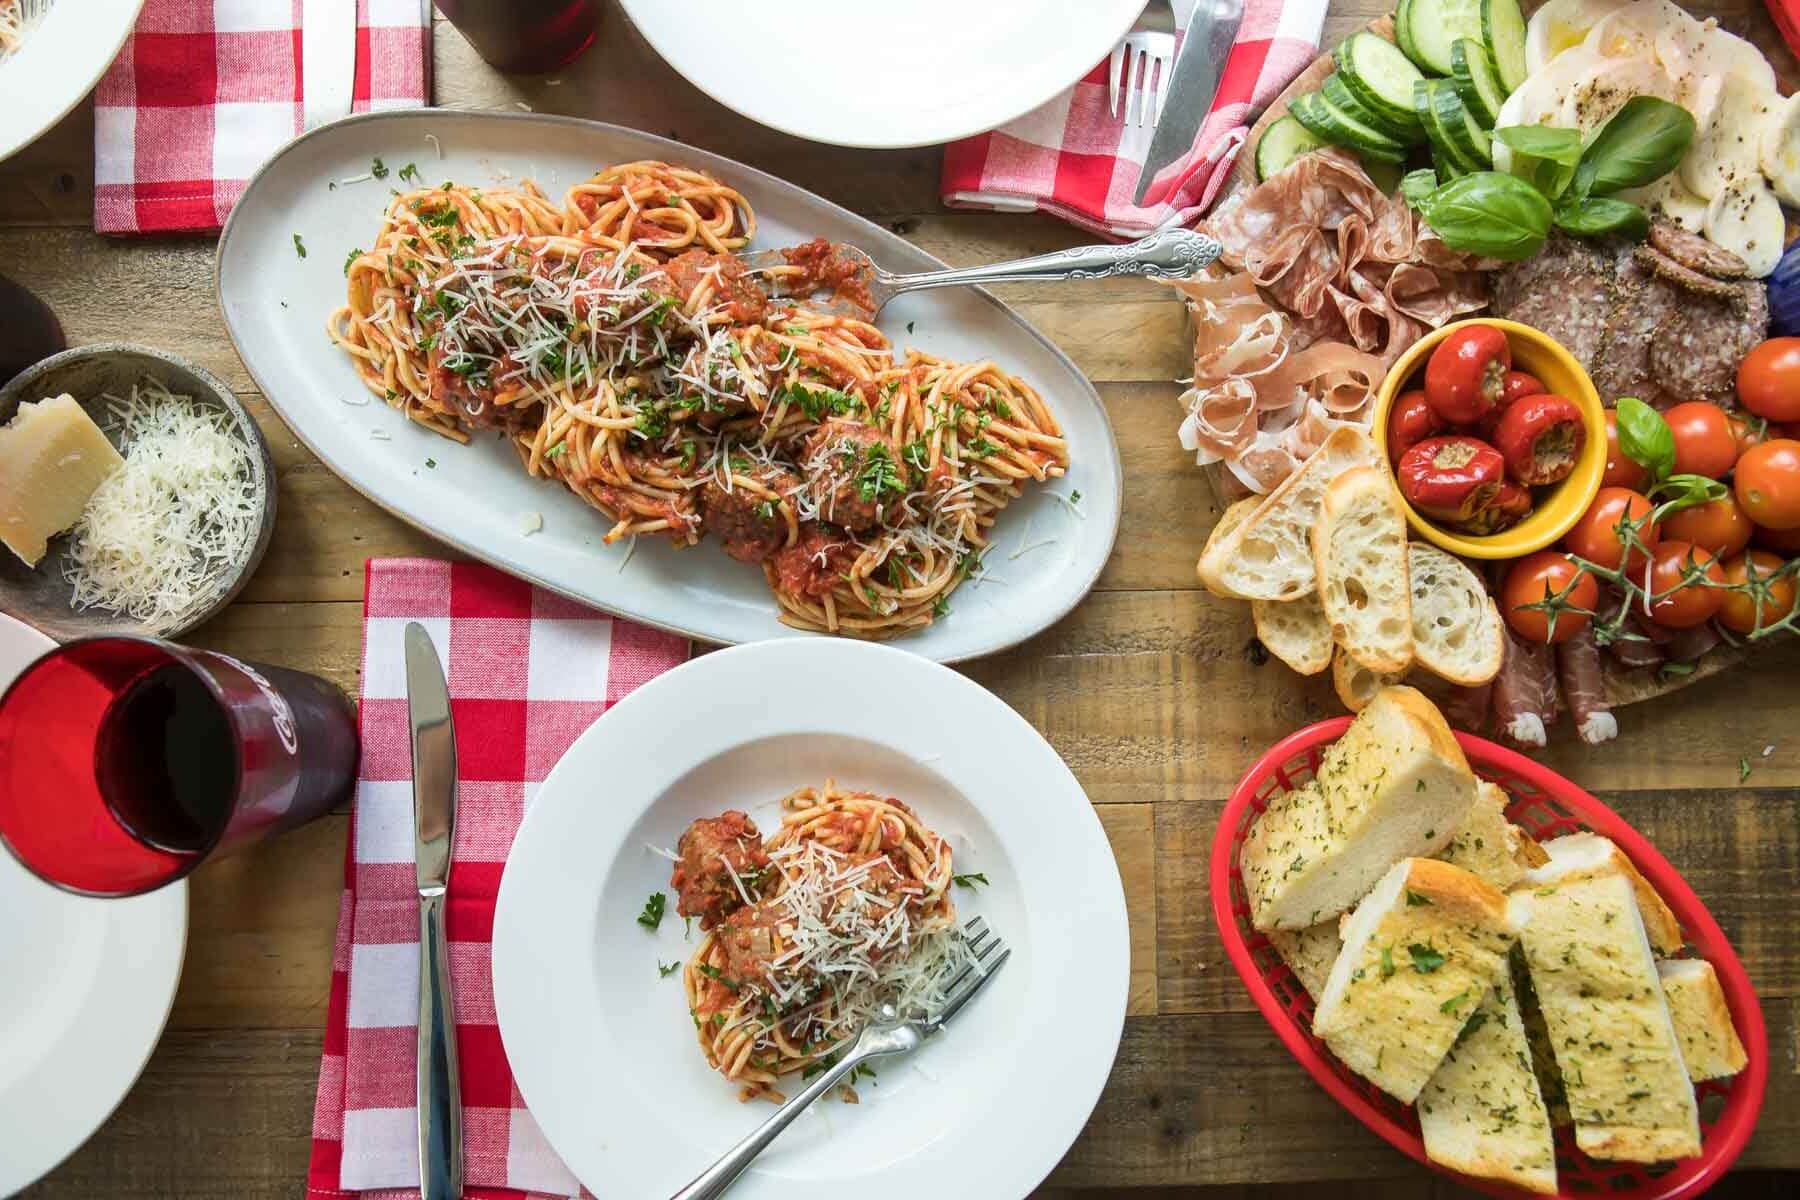 Spaghetti and meatballs on a platter surrounded by other Italian food on a table.